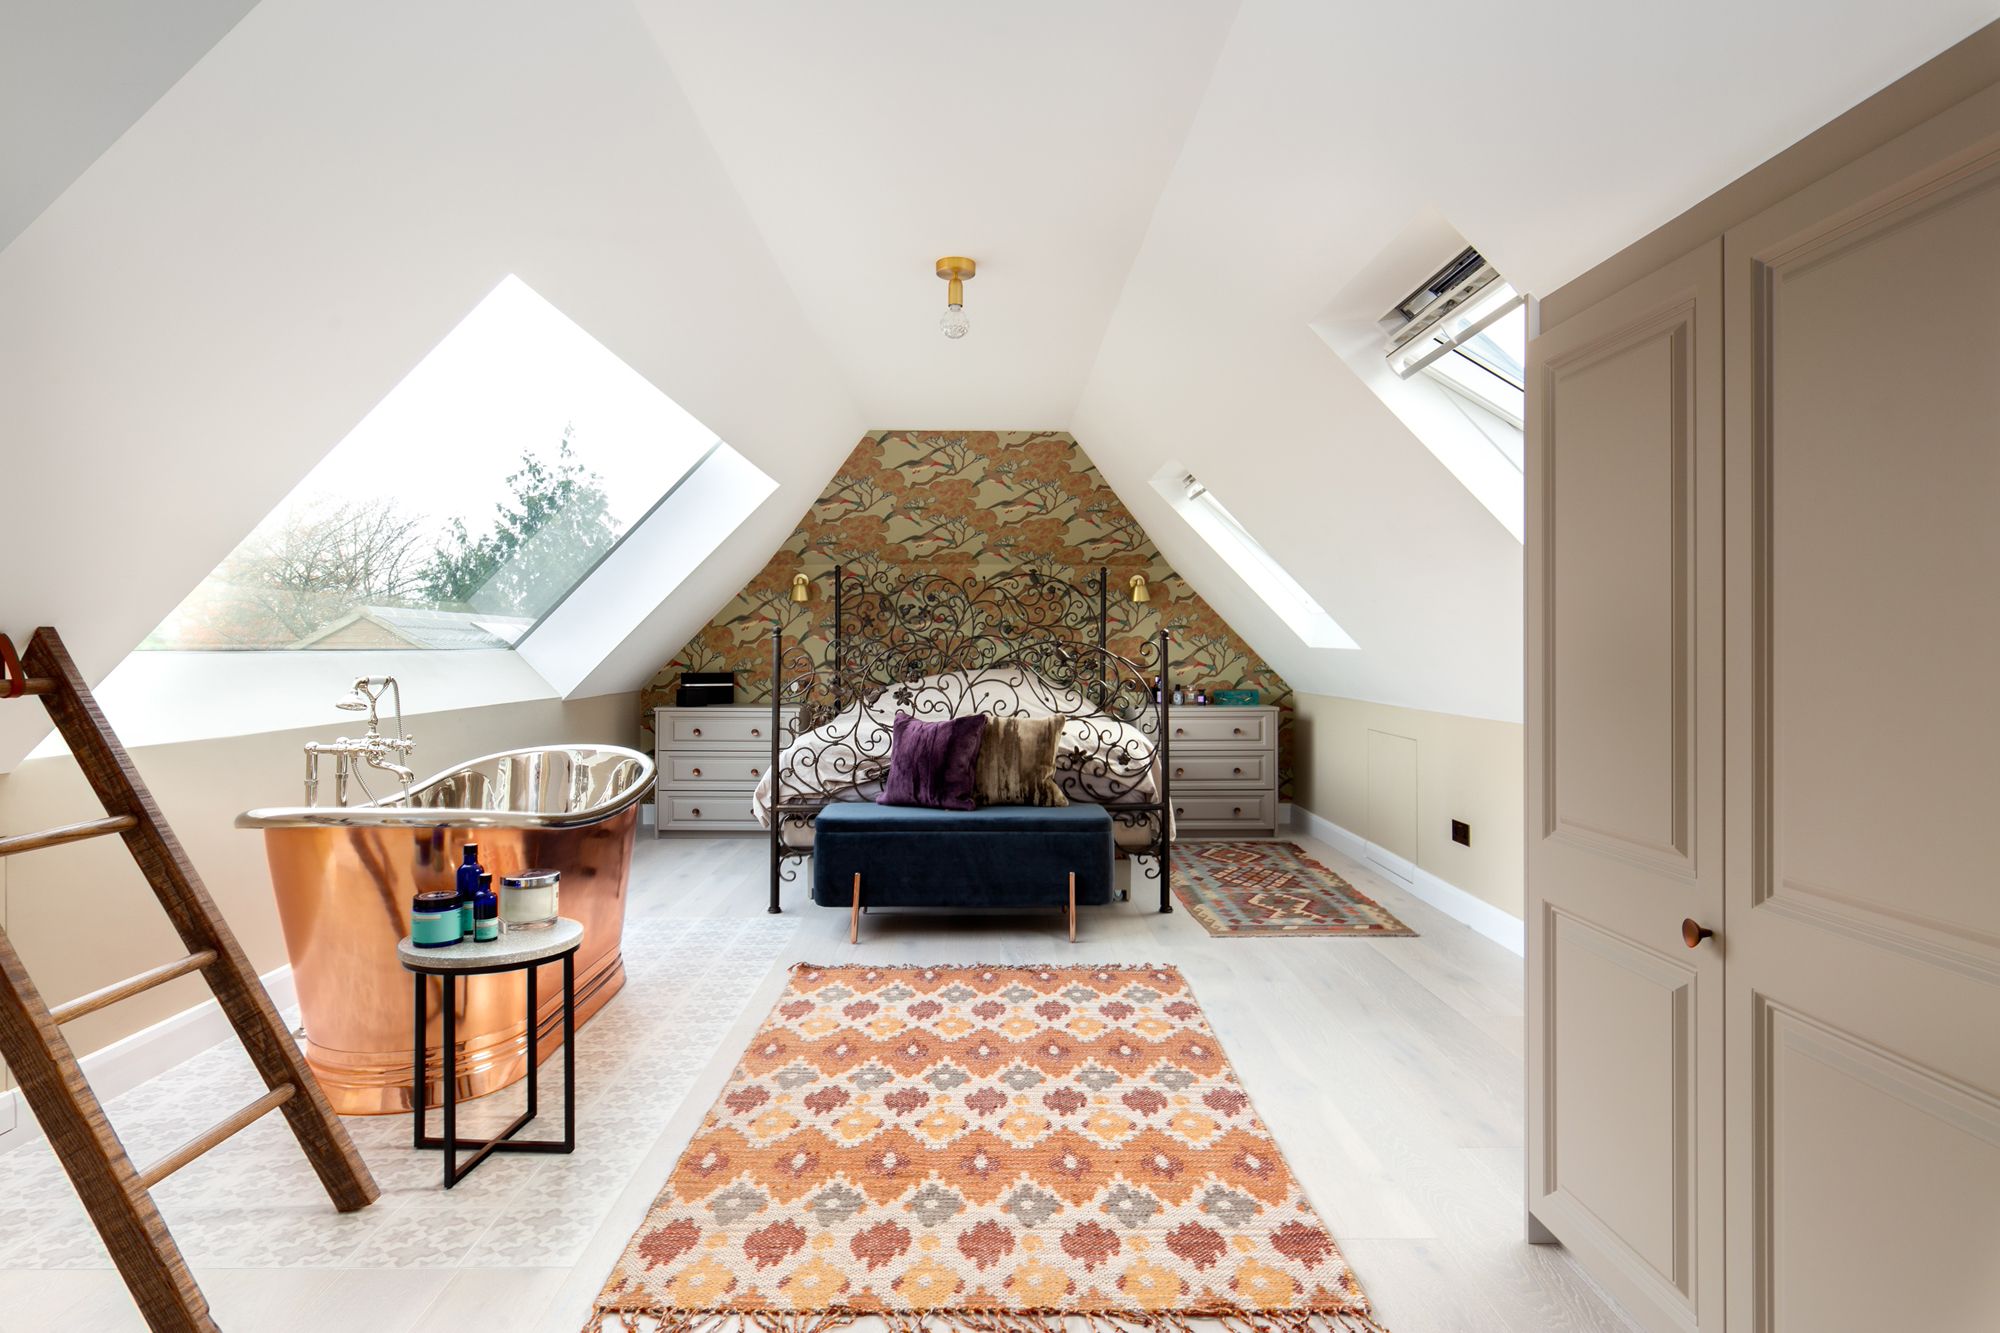 Loft Conversions Your Questions Answered Homebuilding